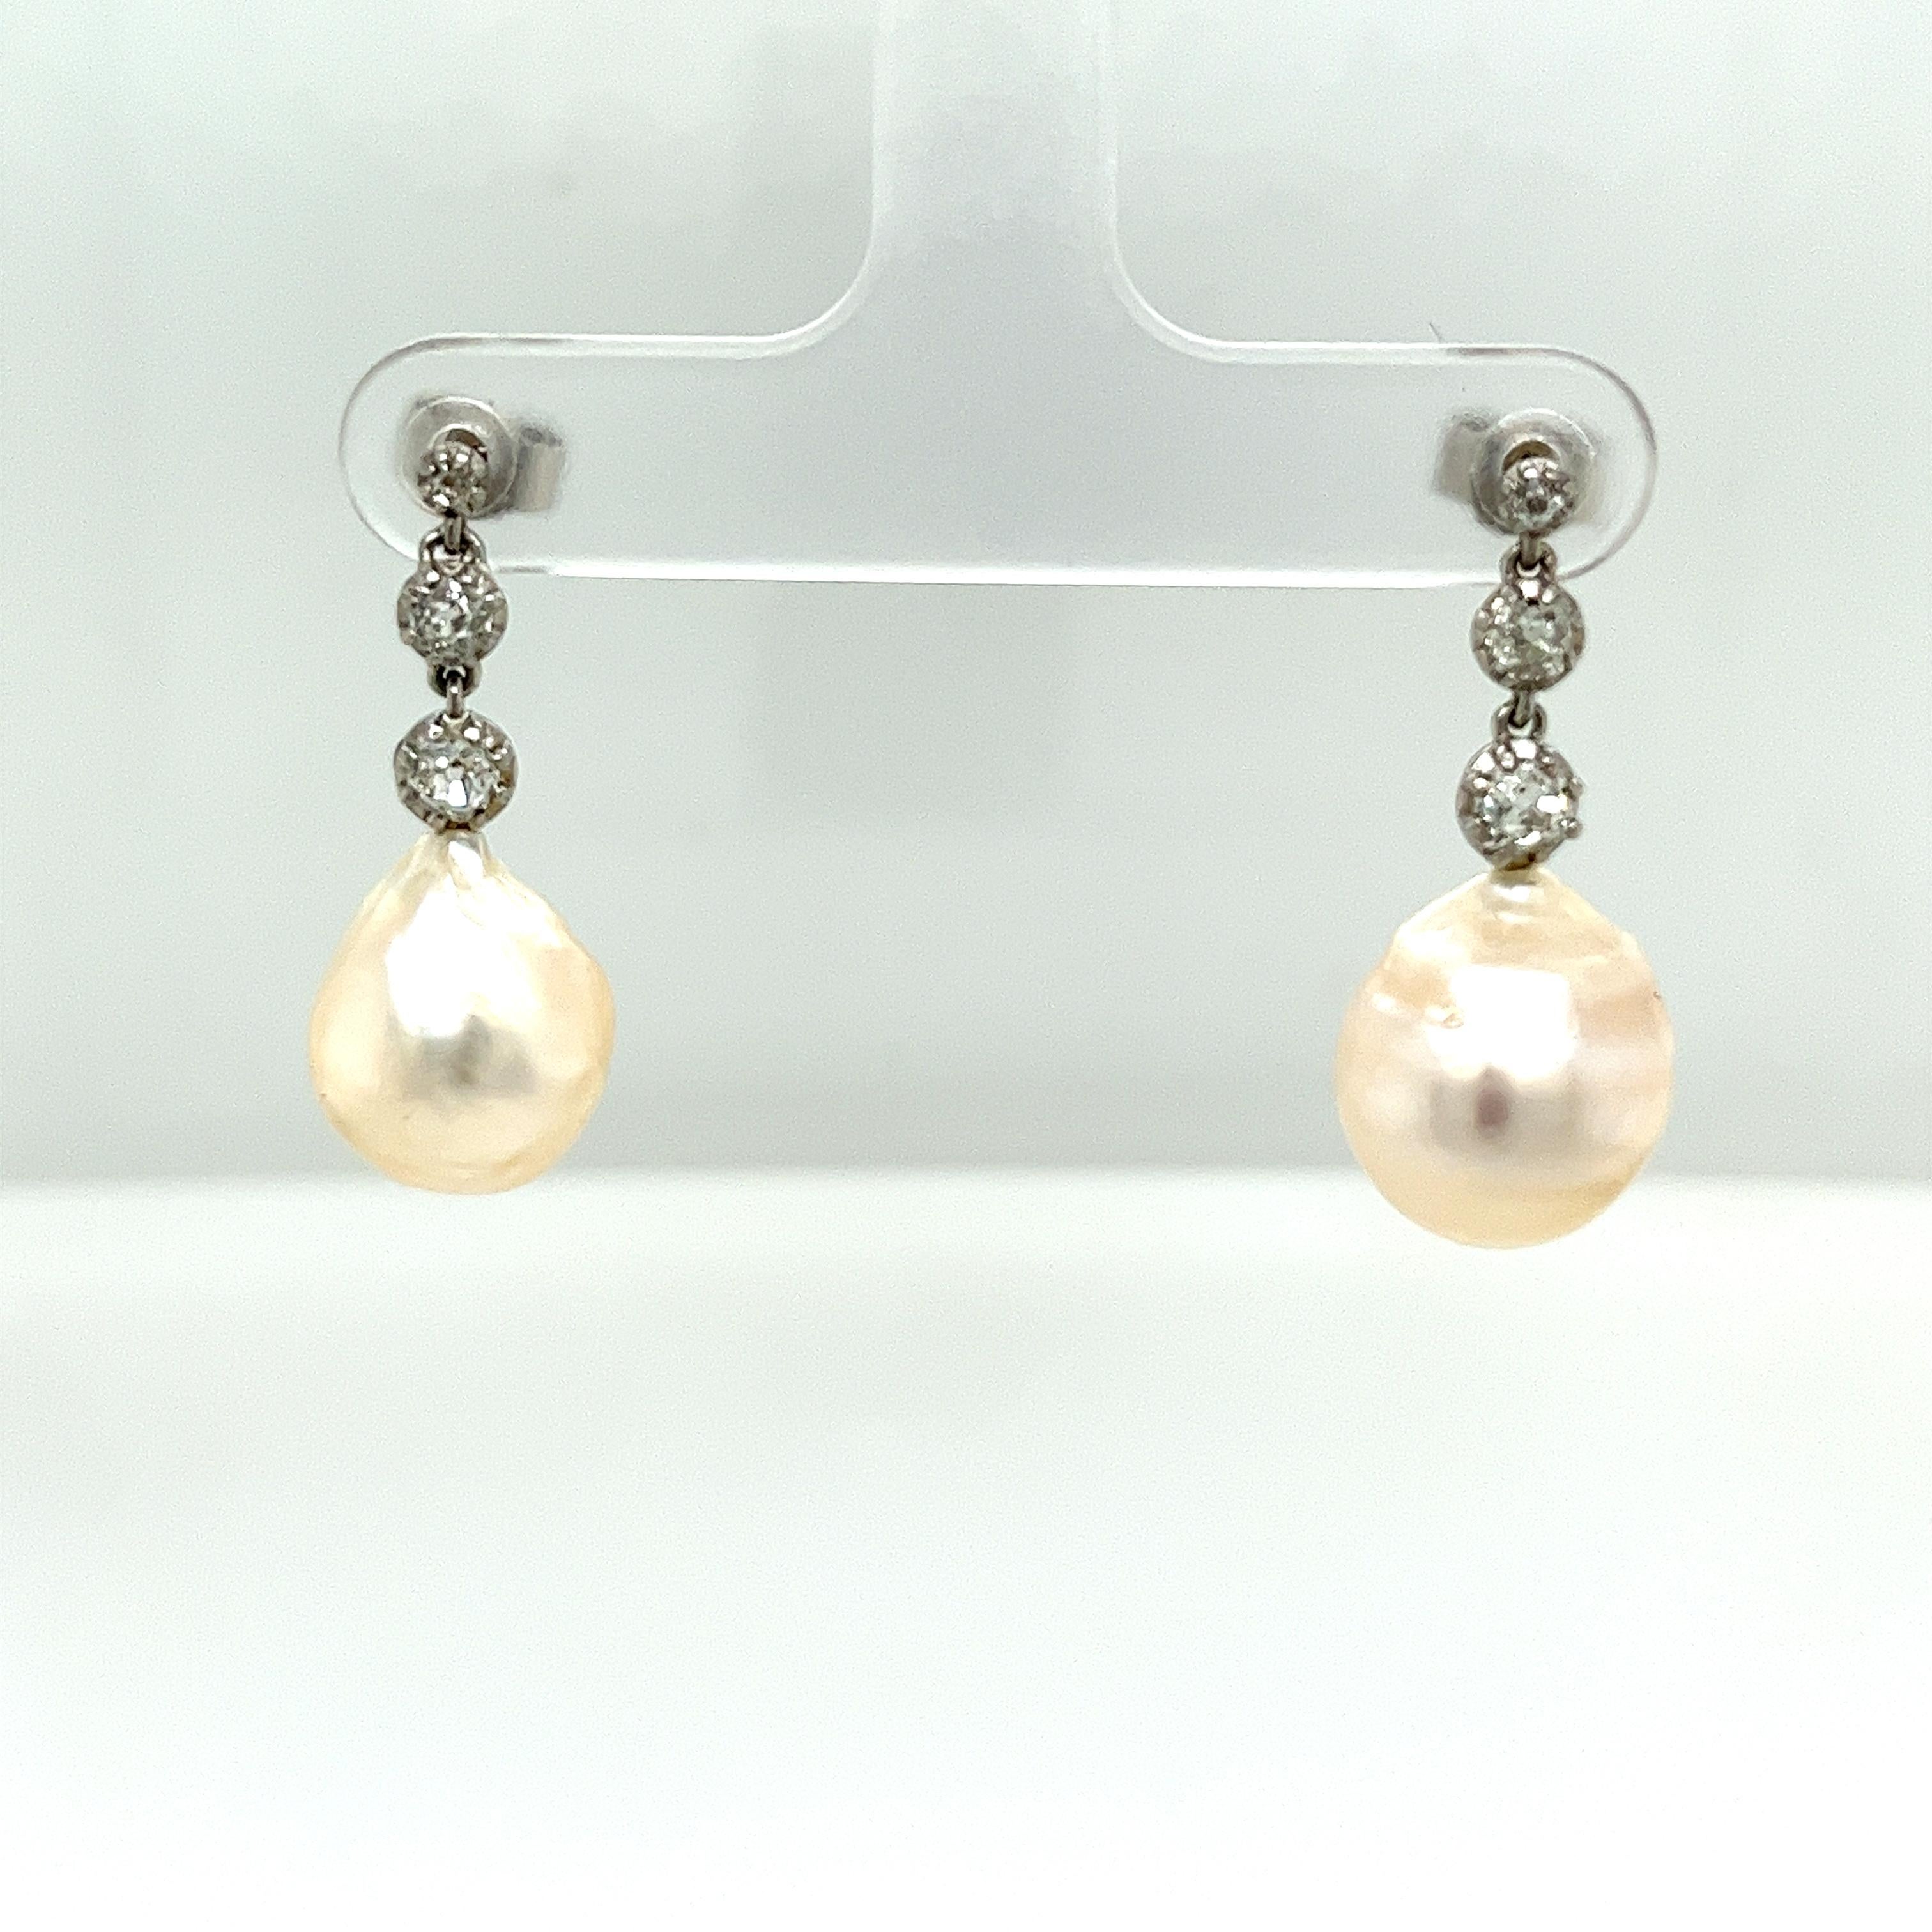 Round Cut Victorian Cut Diamond Drop Earrings Set with 0.30ct Diamonds & 2 Cultured Pearls For Sale